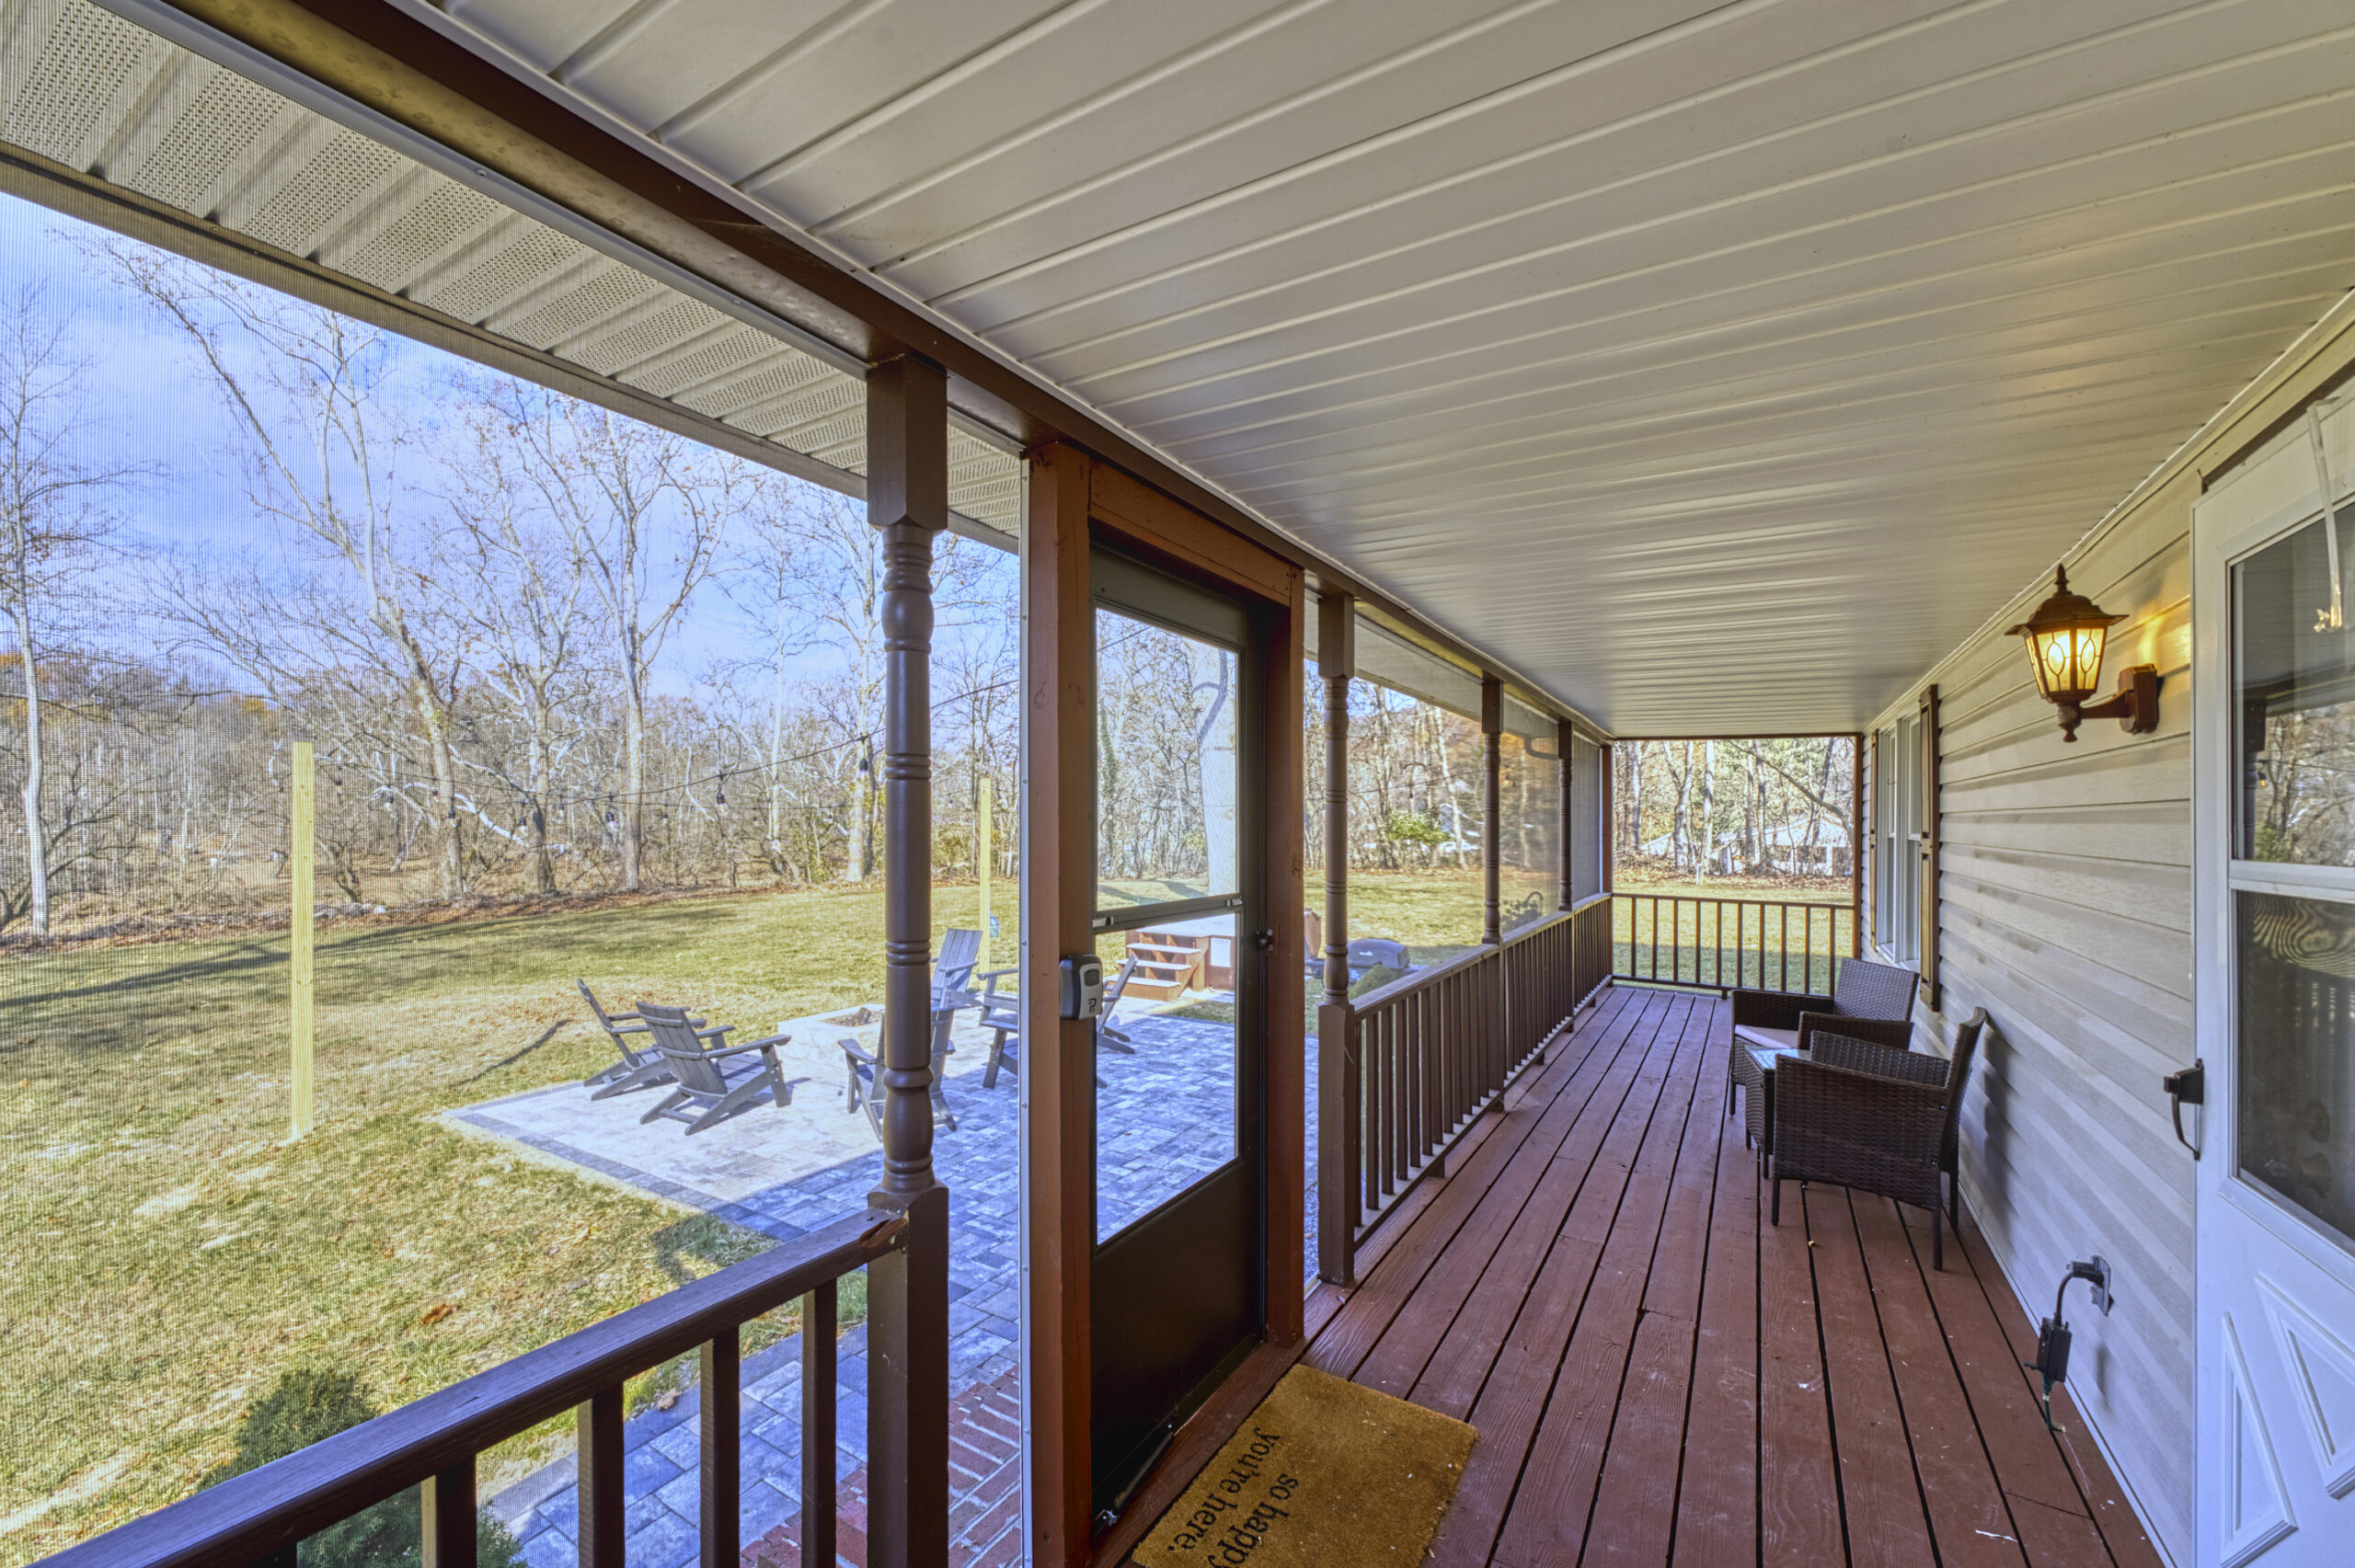 Professional exterior photo of 4809 Grove Hill River Rd - showing the interior of the front screened porch looking over the flat front yard with stone patio